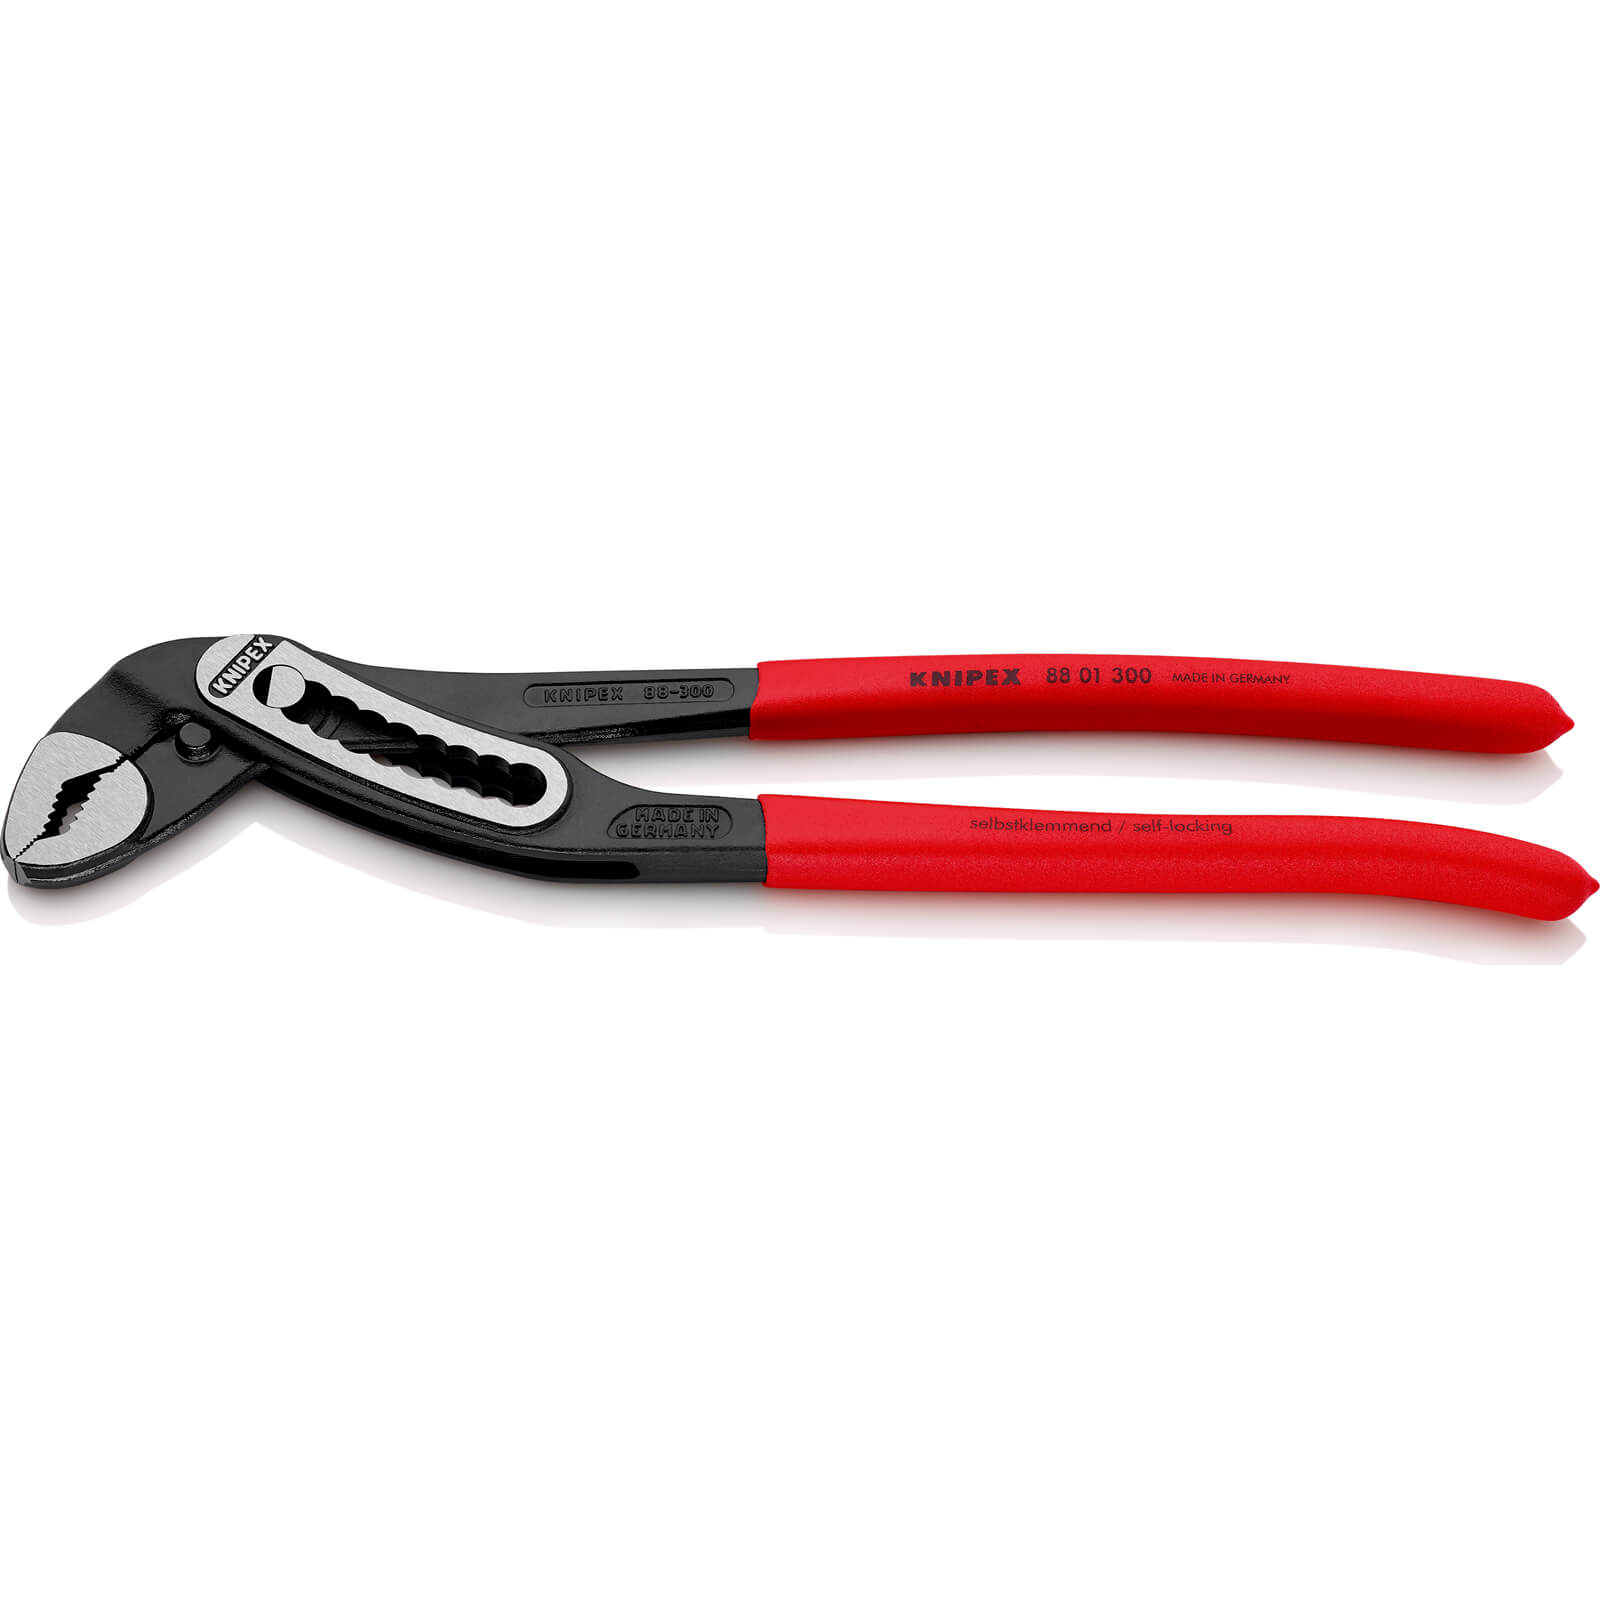 Knipex 88 01 Alligator Slip Joint Water Pump Pliers 300mm